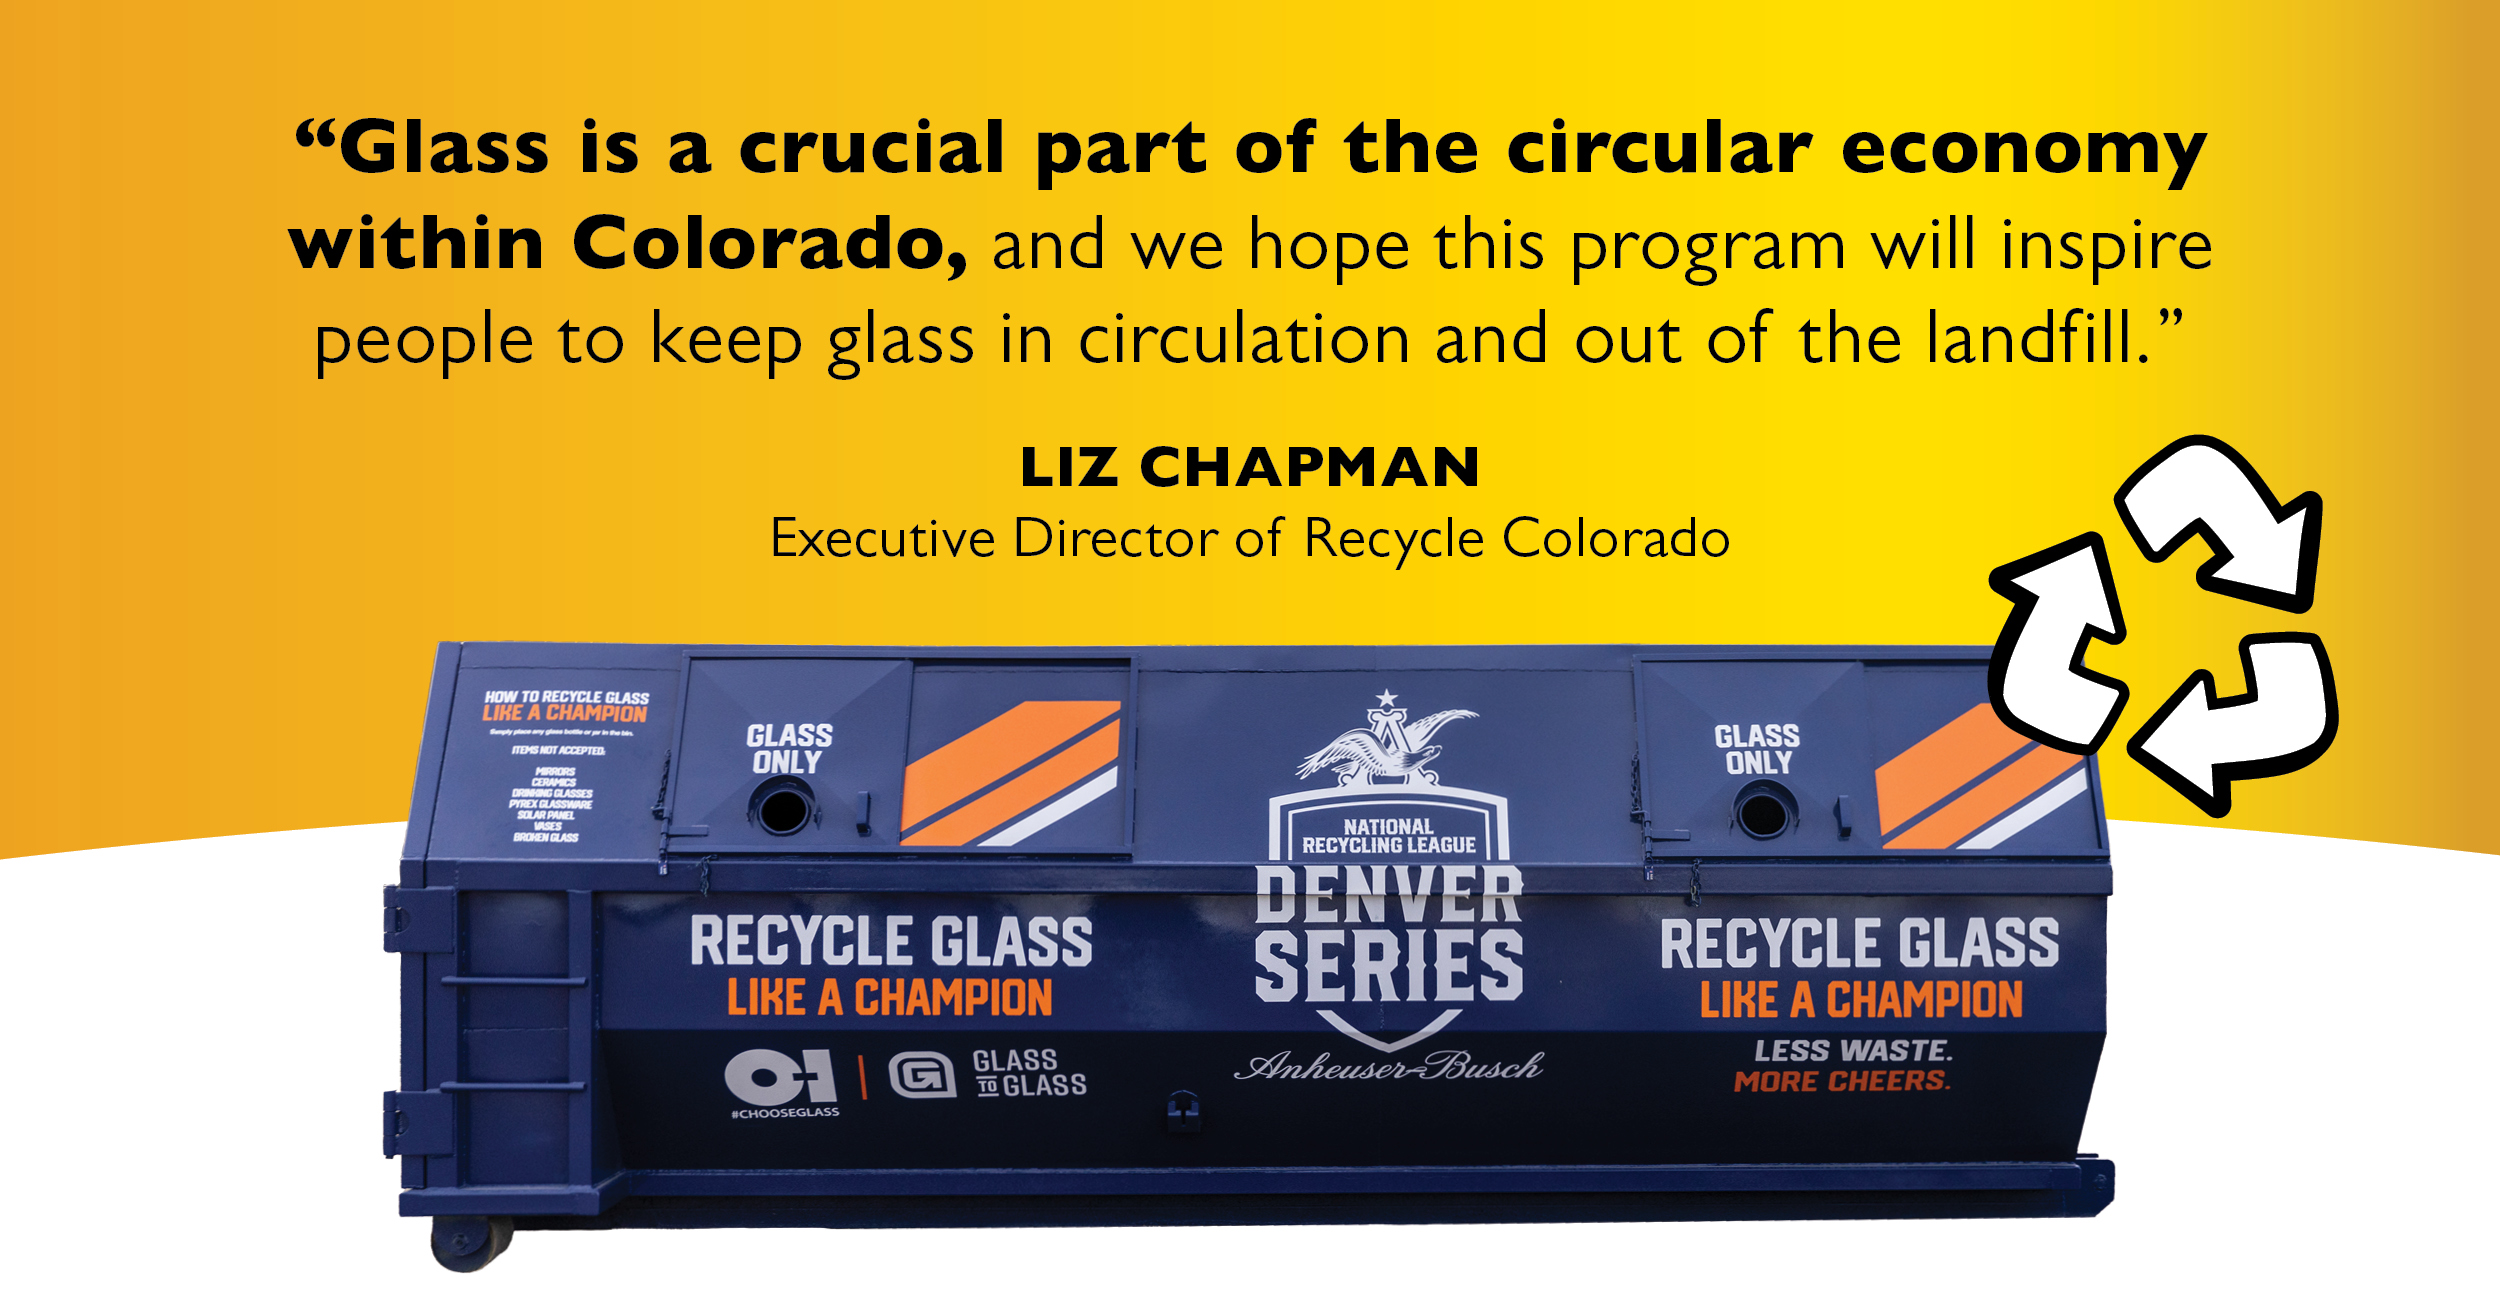 said Liz Chapman, Executive Director of Recycle Colorado. "The Denver Series challenge has the potential to help Colorado increase its recycling rate above the current 16%. Glass is a crucial part of the circular economy within Colorado, and we hope this program will inspire people to keep glass in circulation and out of the landfill."